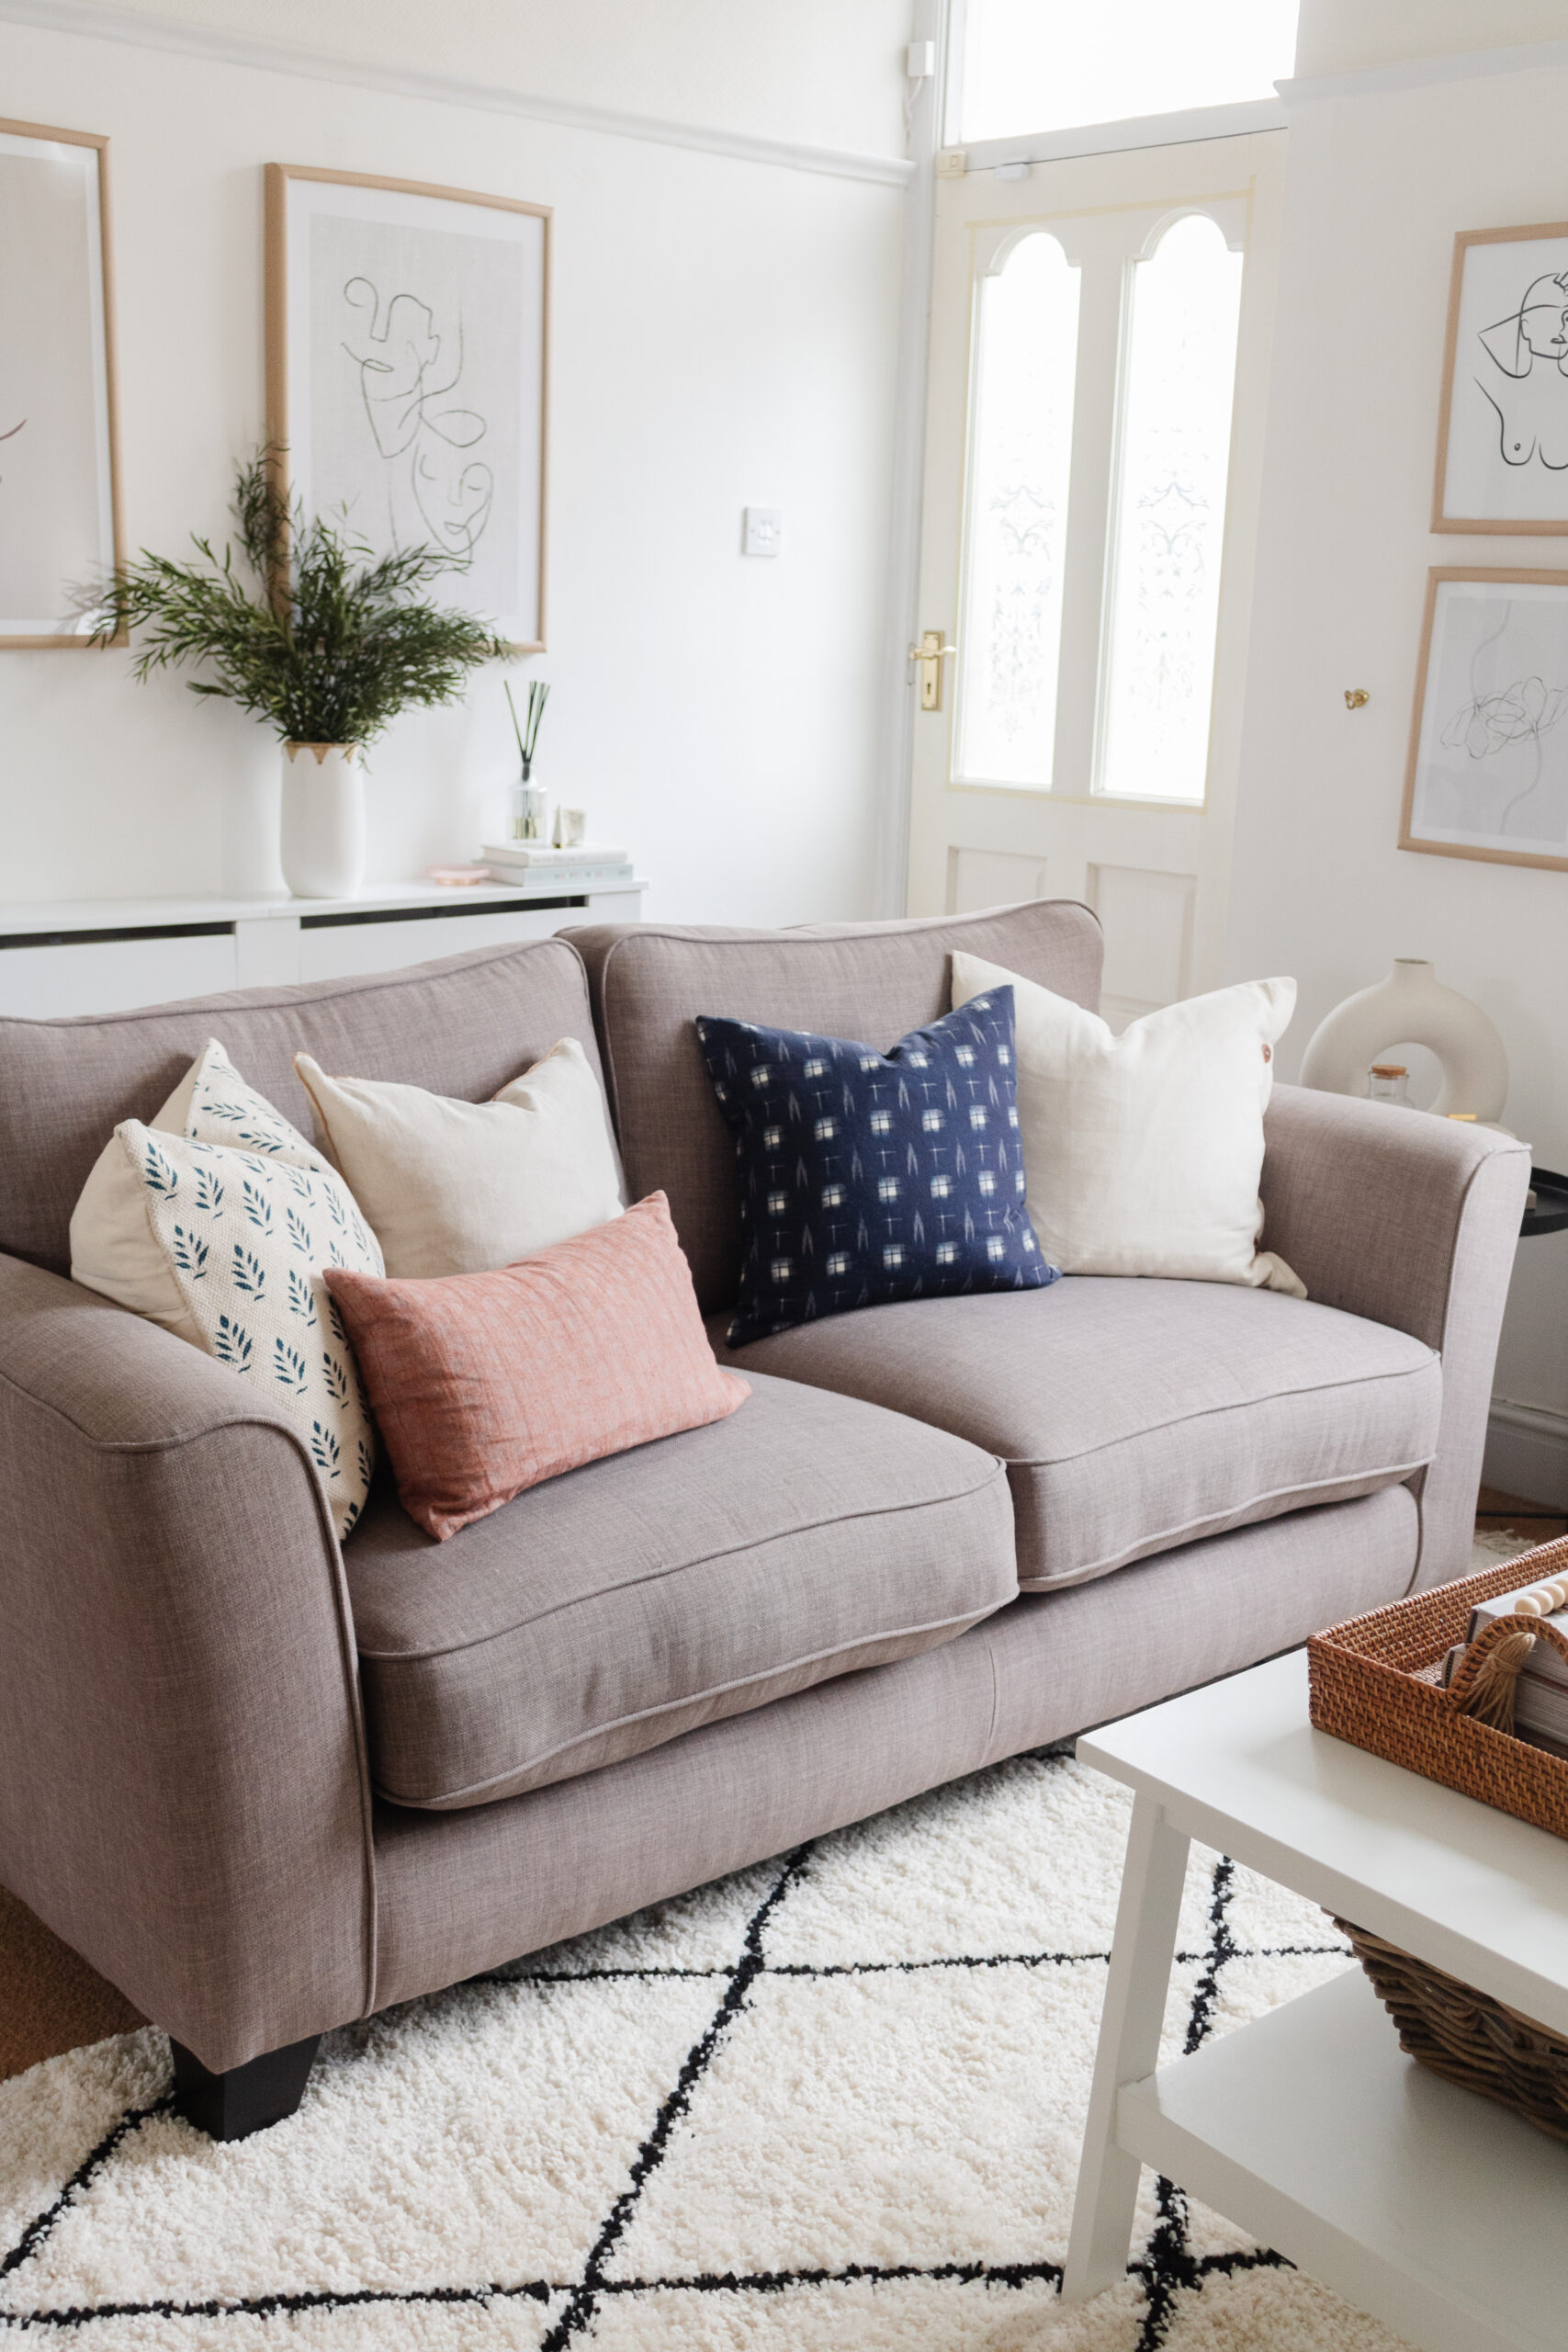 https://www.aneditedlifestyle.com/wp-content/uploads/2021/01/an-edited-lifestyle-interiors-restuffing-a-sofa-3-scaled.jpg